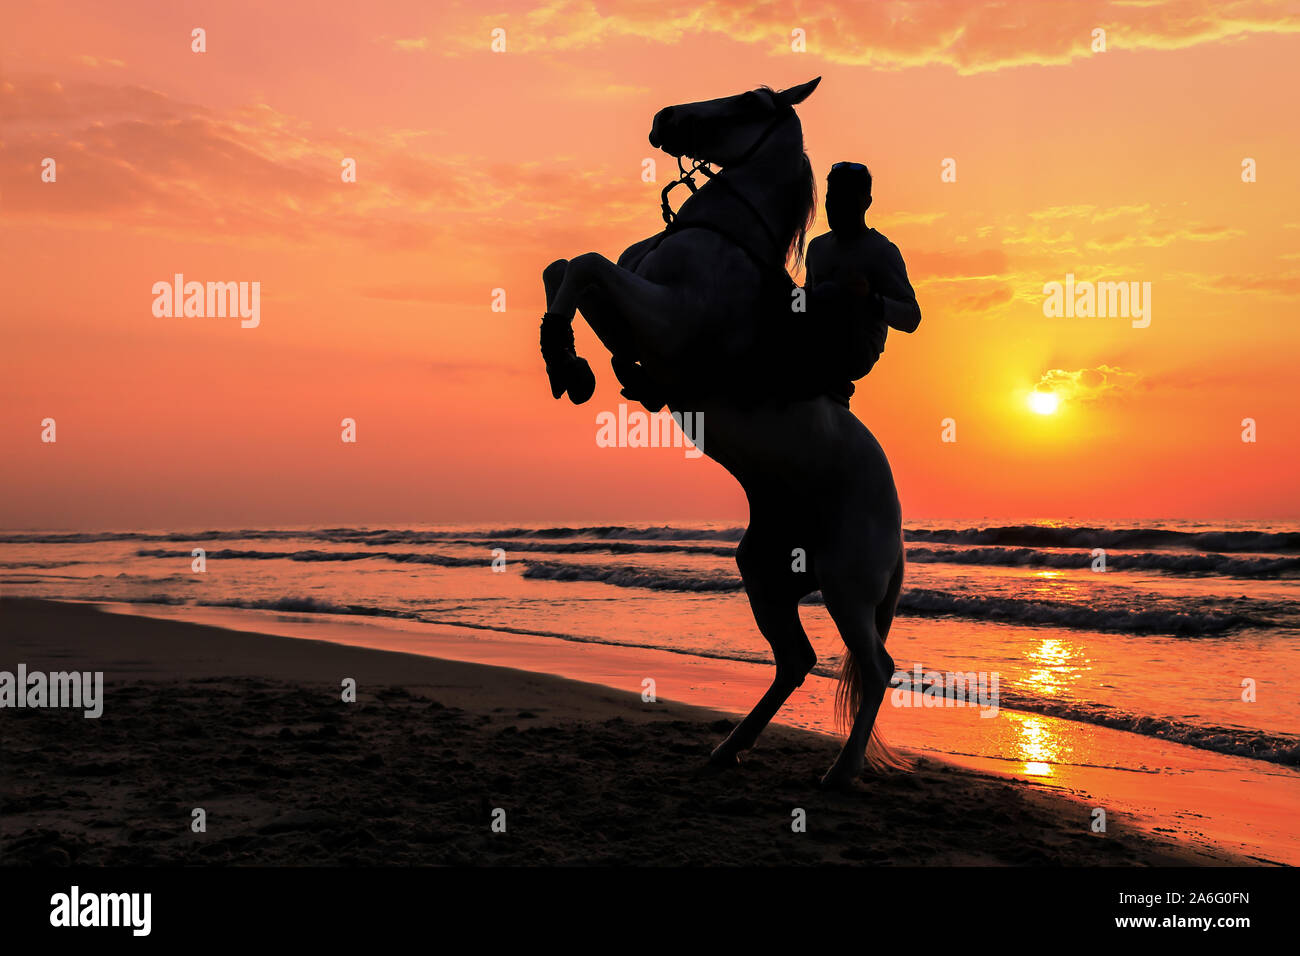 Silhouette photo of horse rearing up with rider Stock Photo